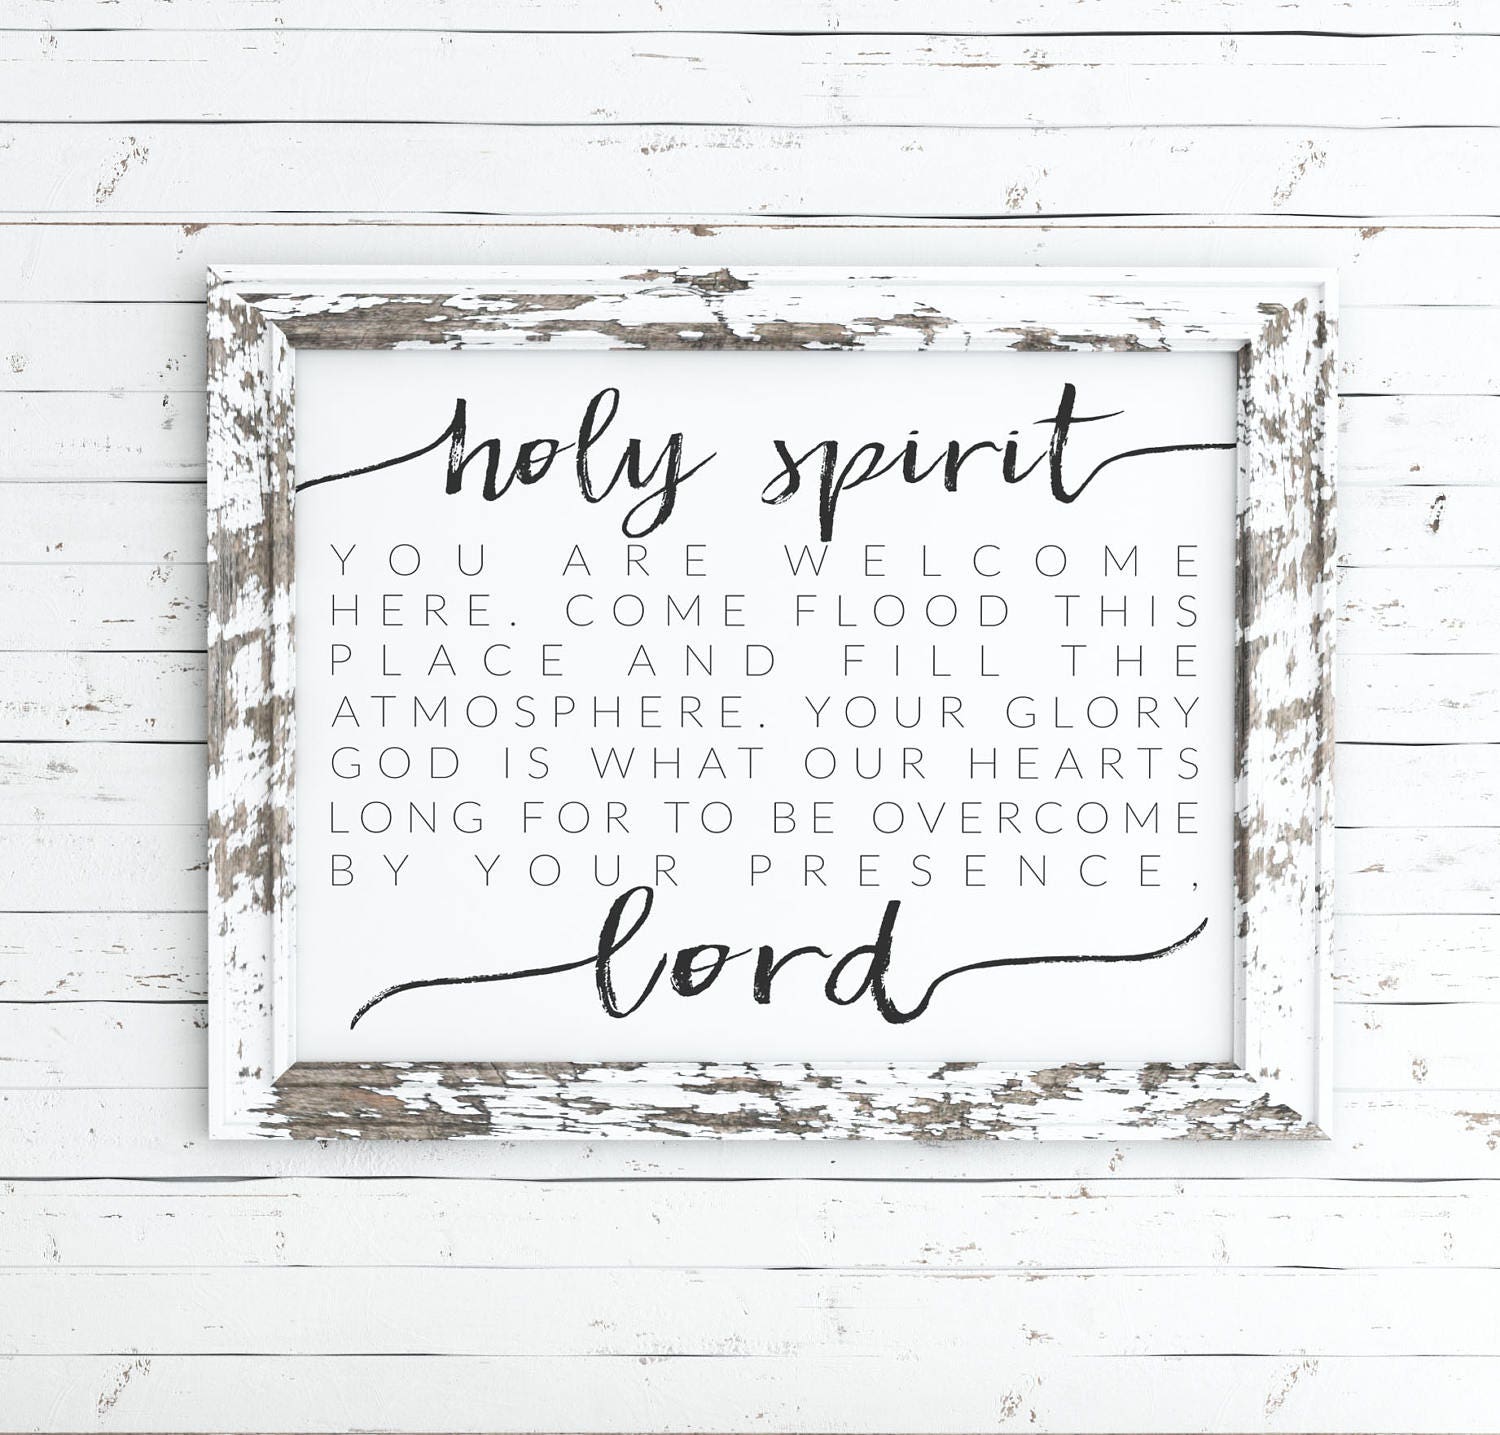 holy spirit you are welcome here pdf